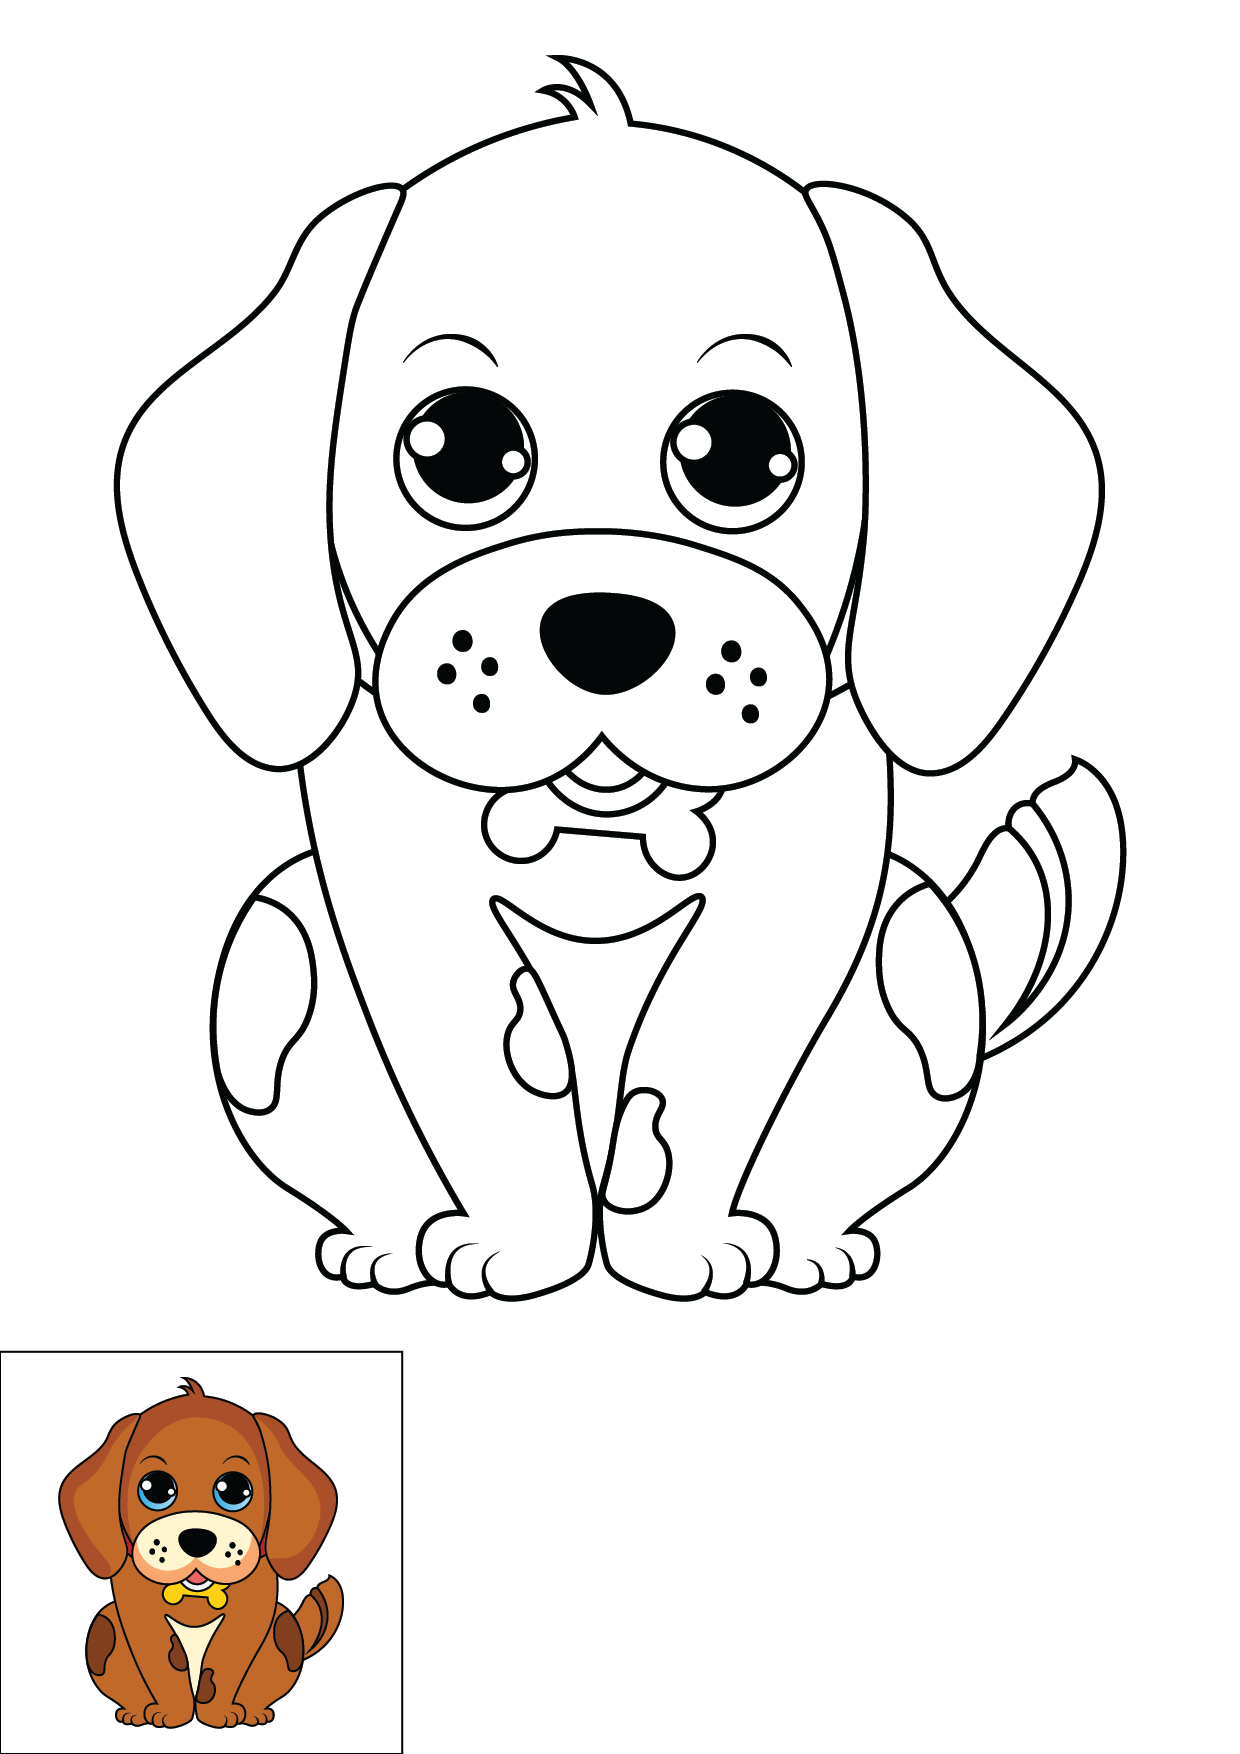 How to Draw A Puppy Step by Step Printable Color